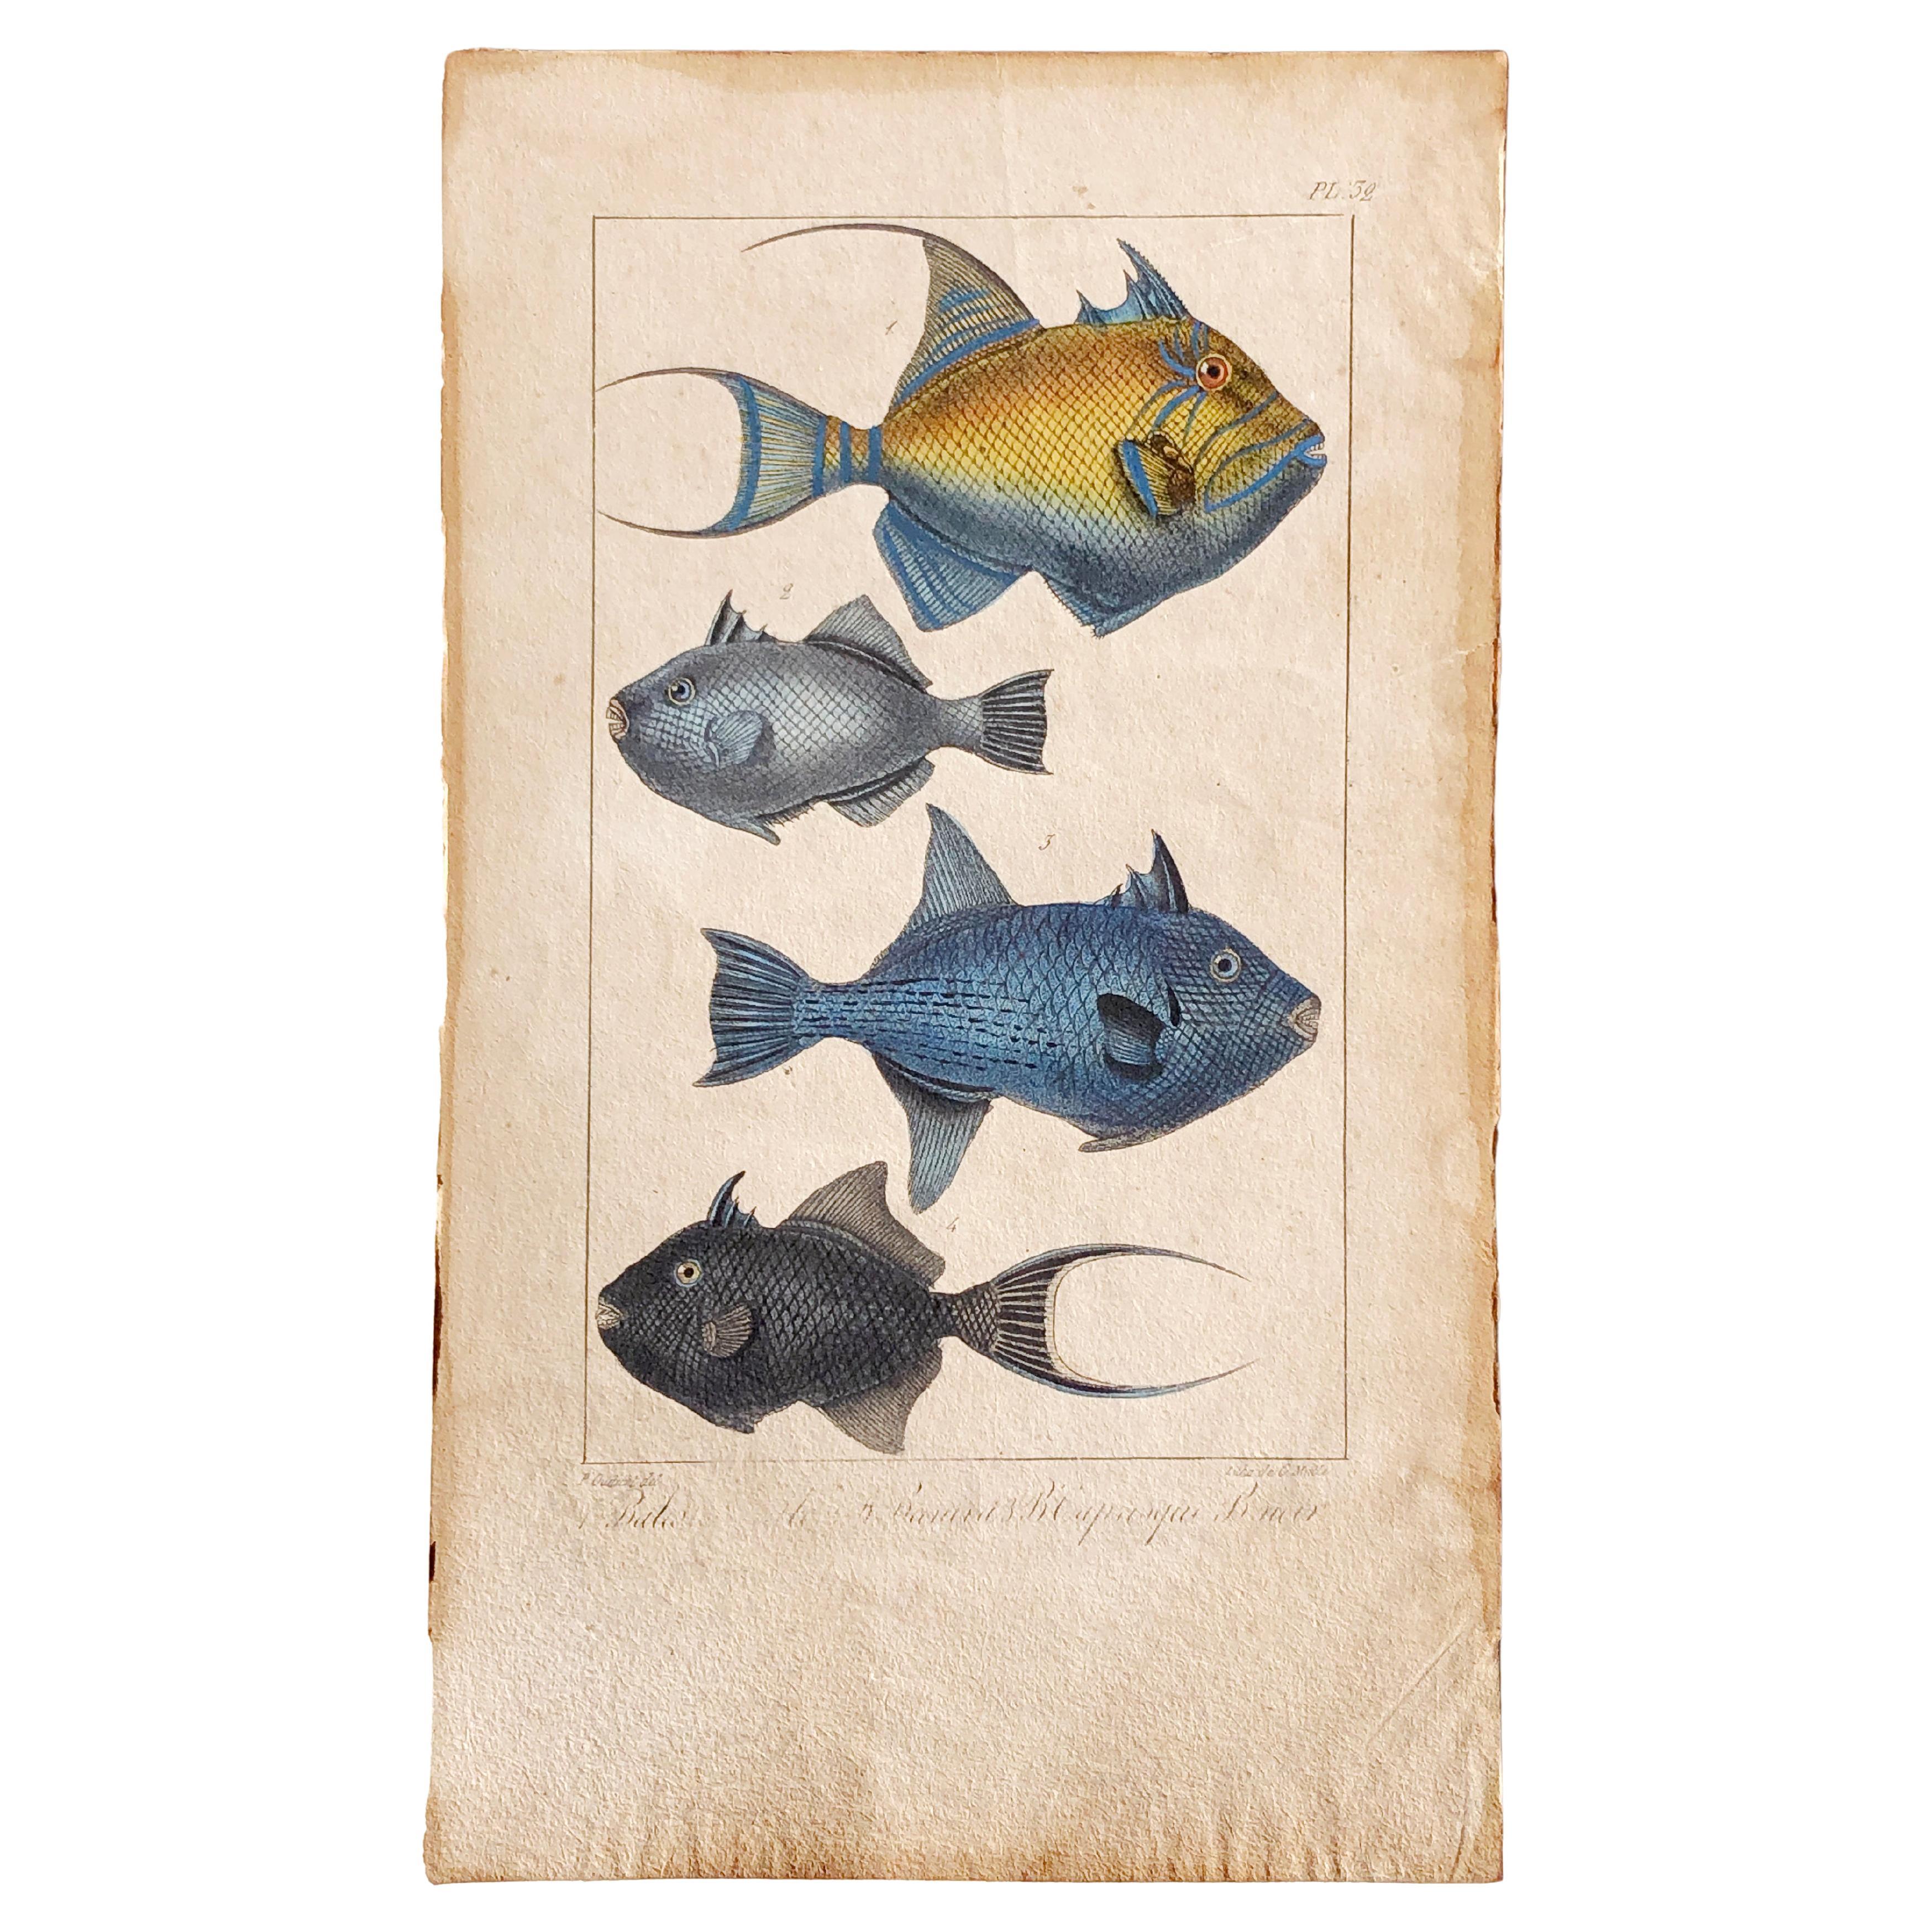 Natural history lithograph, 4 tropical fish - Plate 32 - P. Oudart & C. Motte For Sale